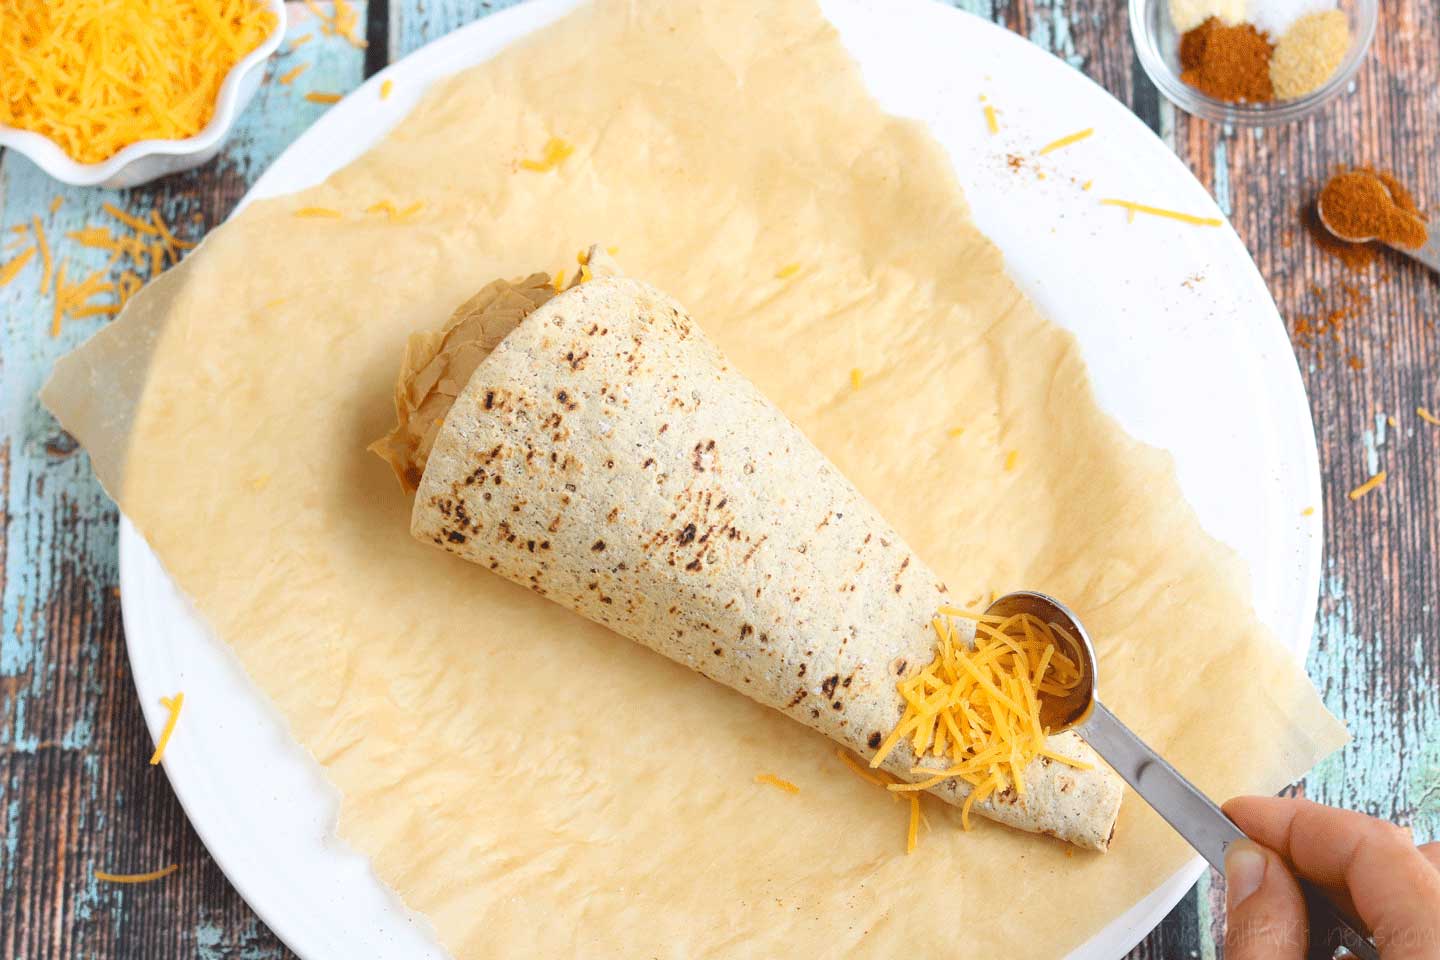 Next, sprinkle a little cheese near the end of your cone and microwave briefly again.